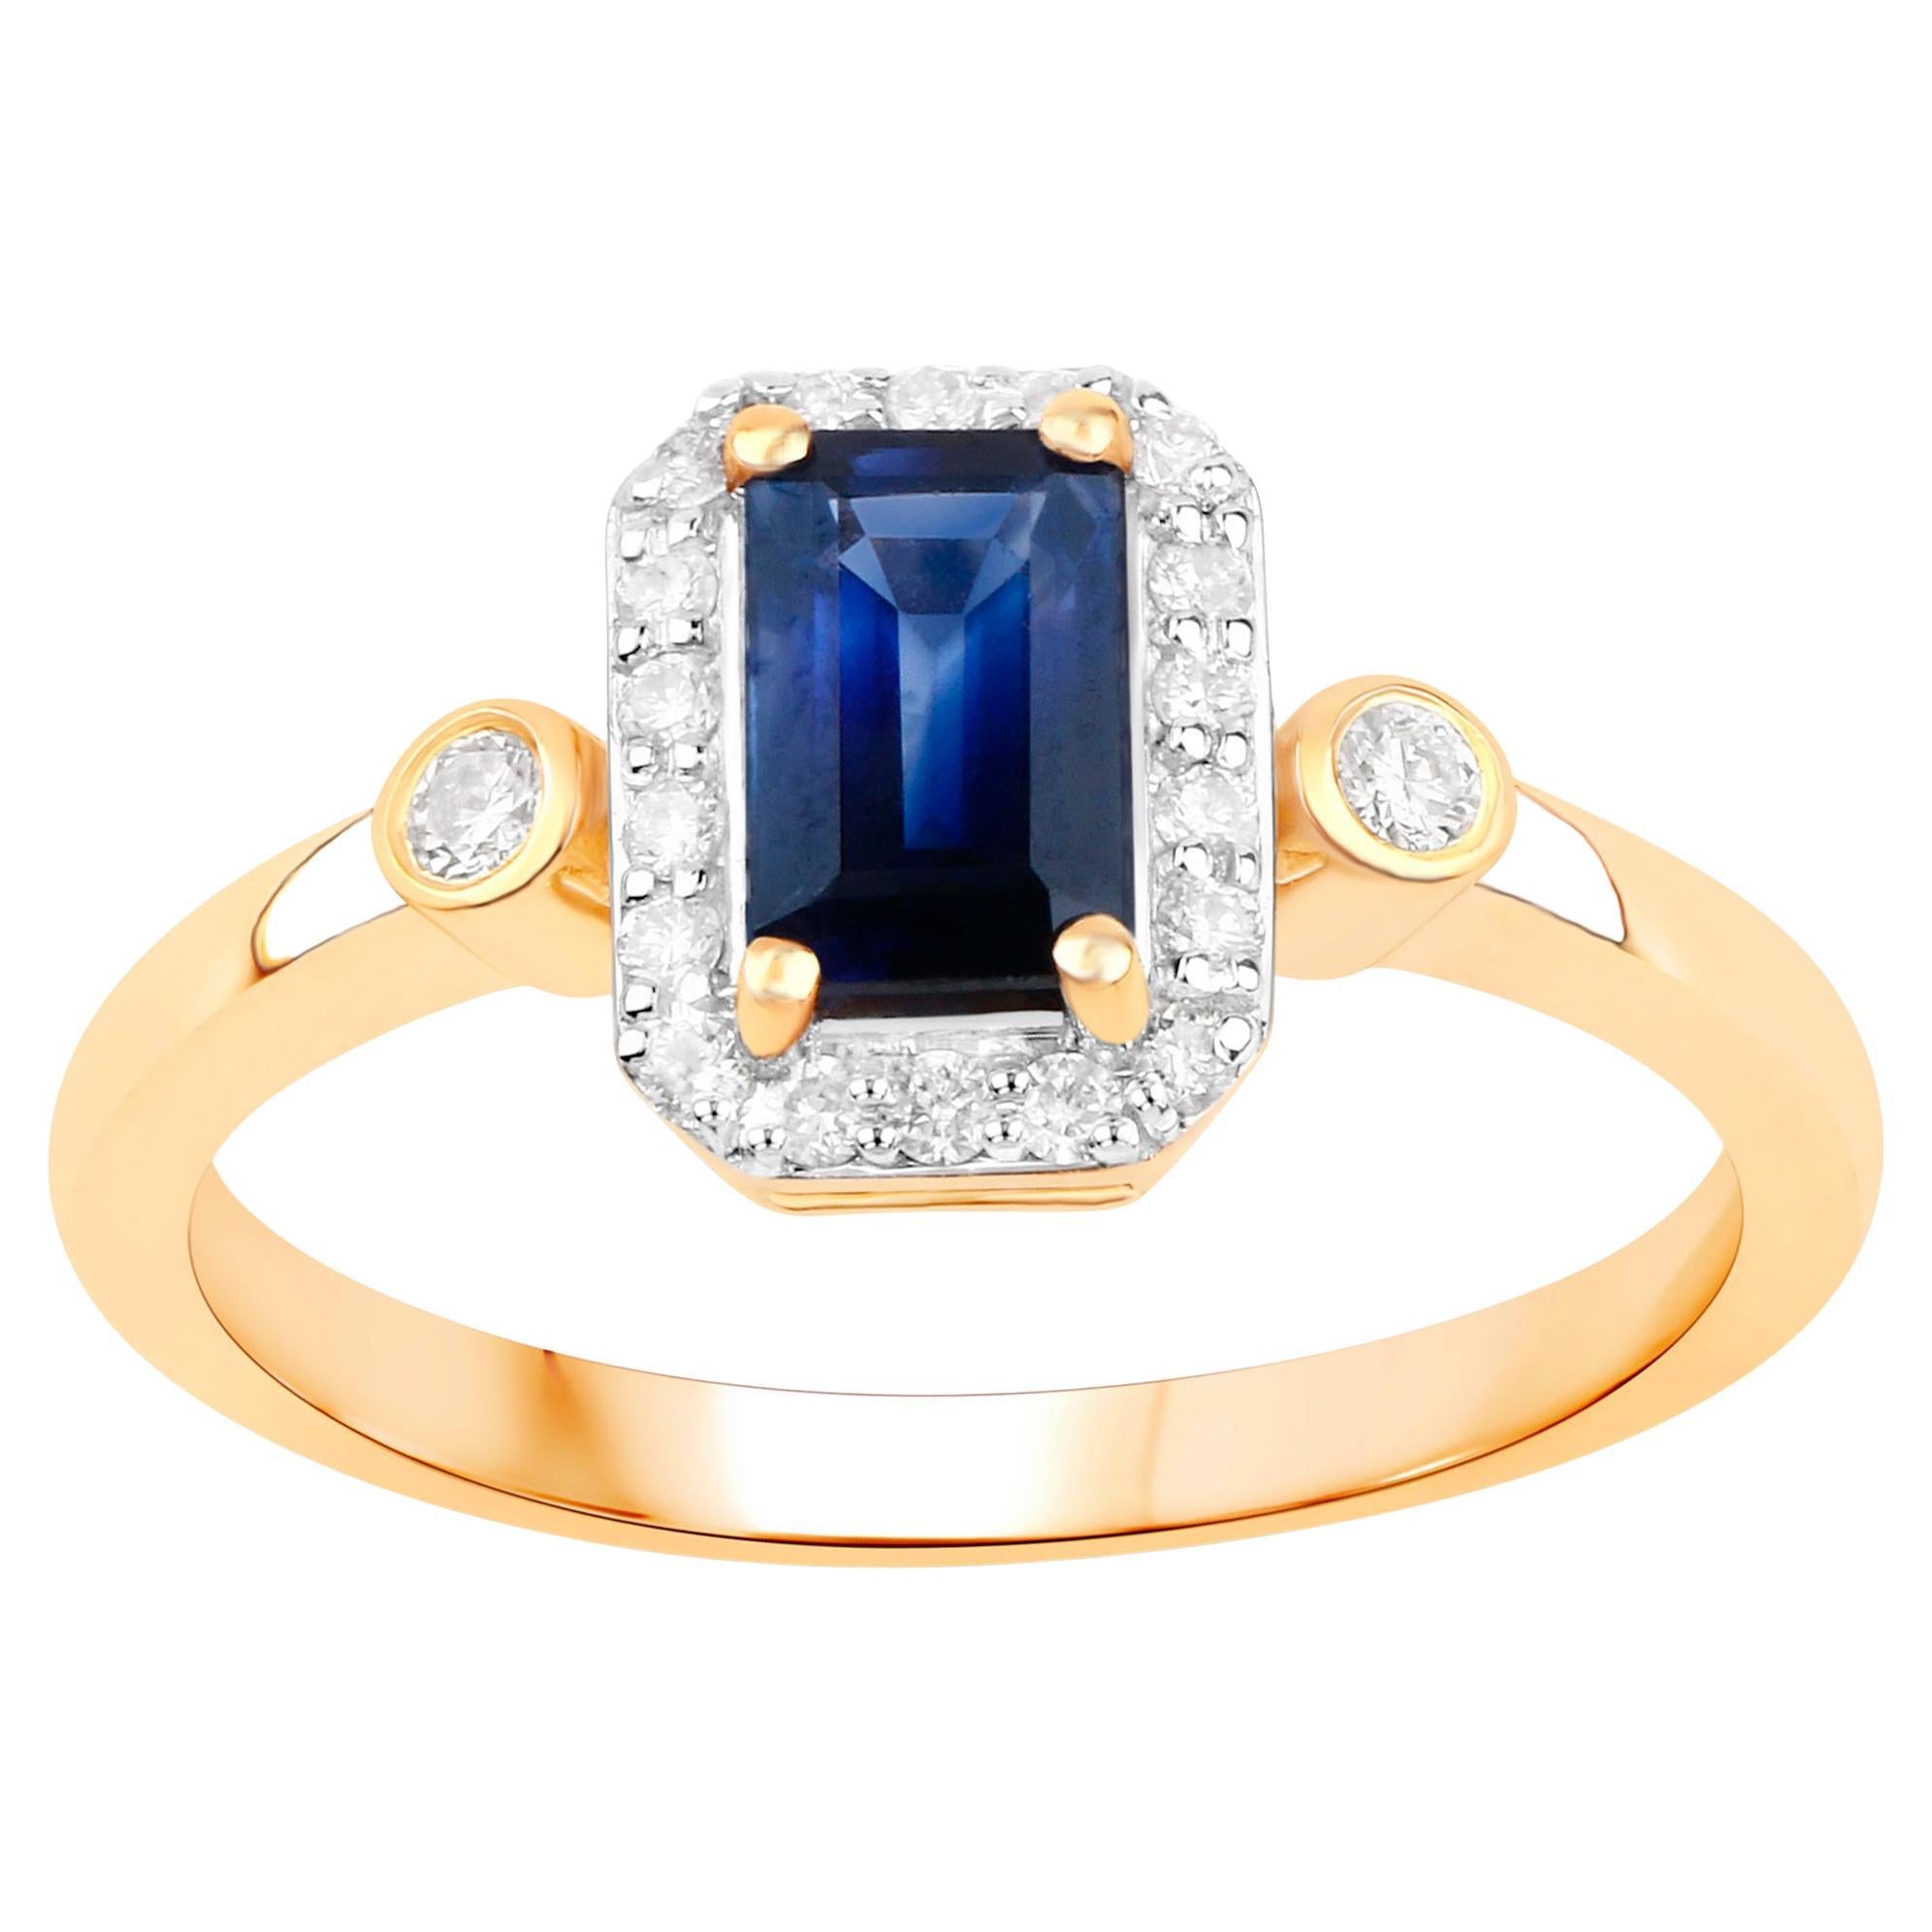 Blue Sapphire Ring With Diamonds 1.08 Carats 14K Yellow Gold For Sale